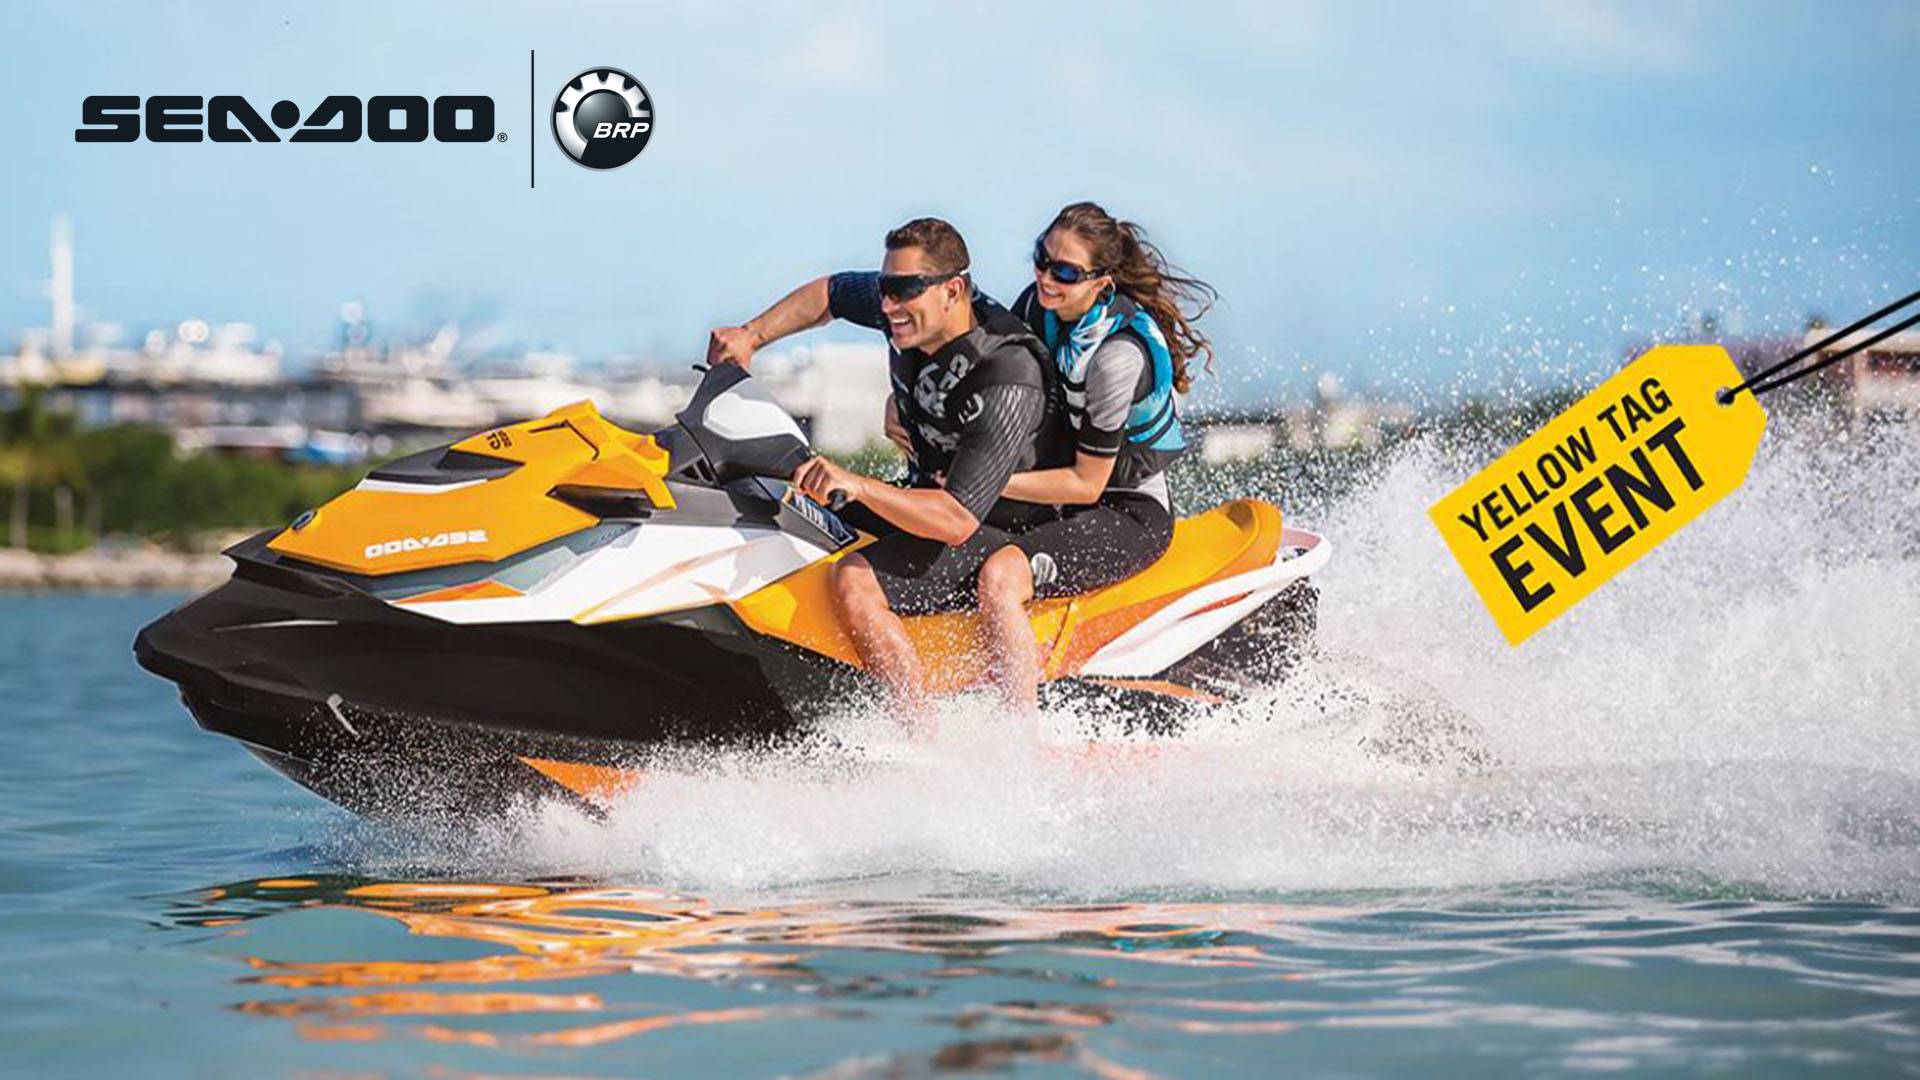 sea-doo-yellow-tag-event-rebate-and-financing-promotion-sea-doo